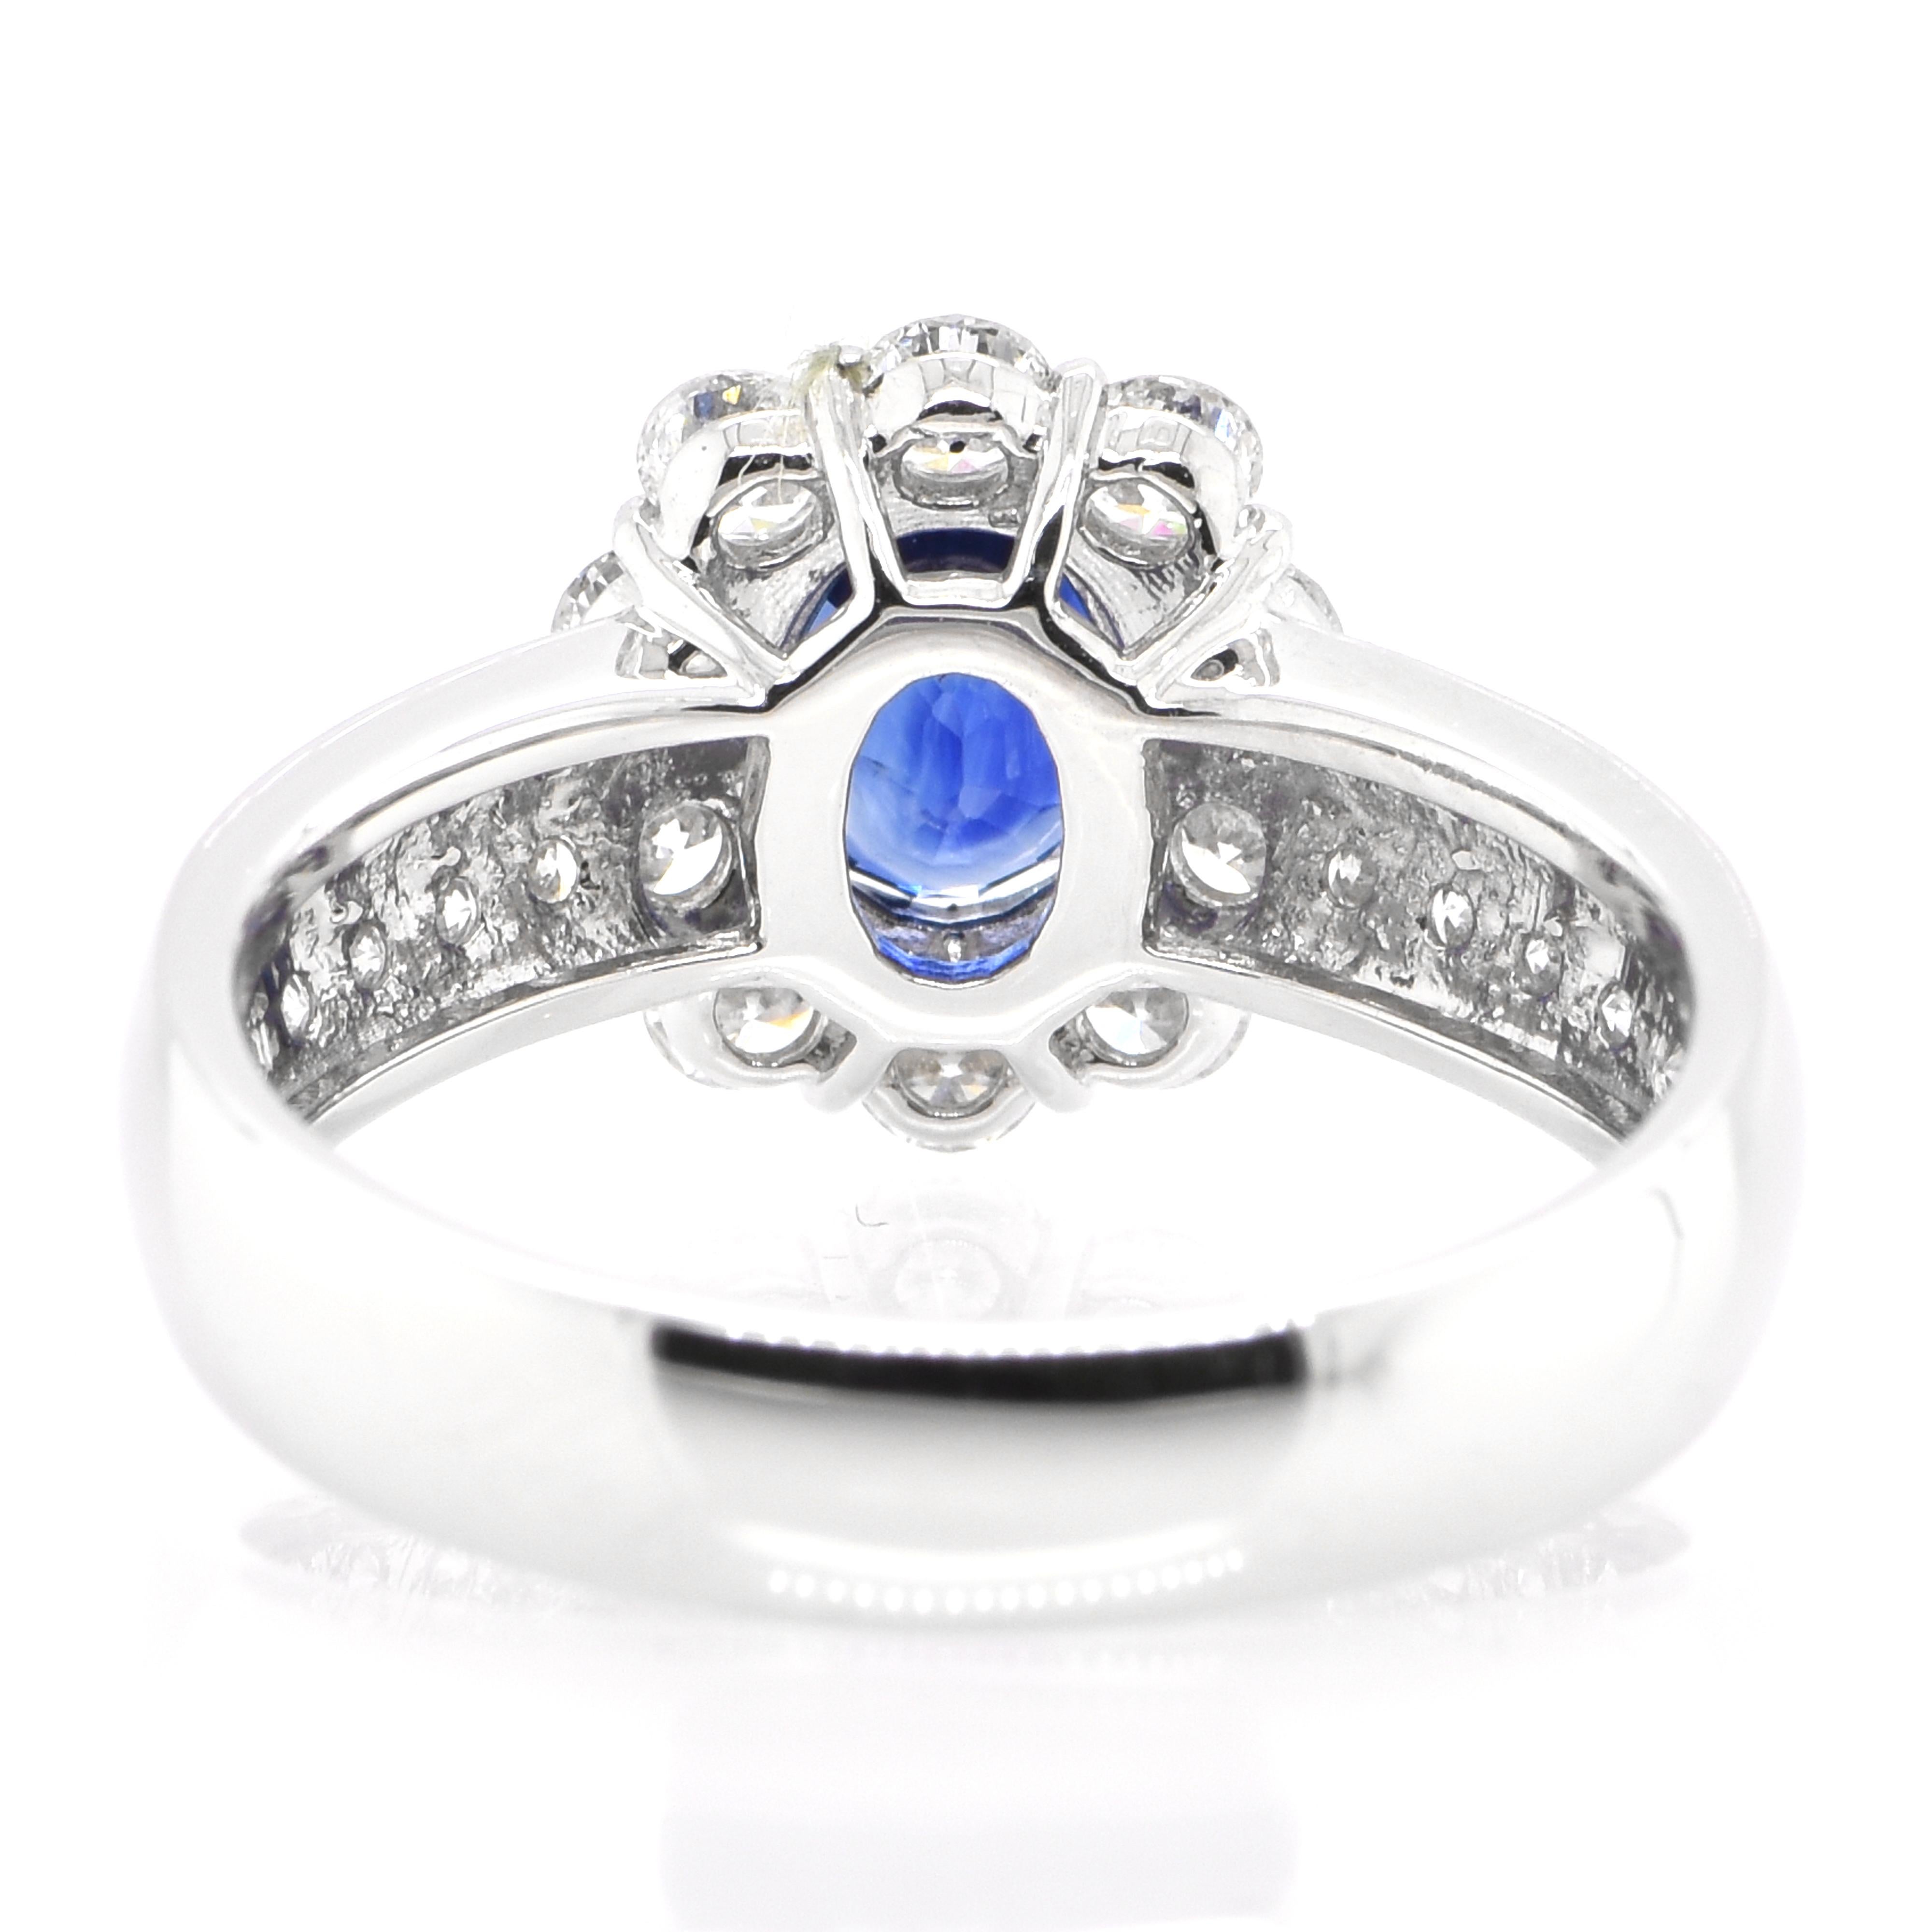 Women's 1.26 Carat Natural Blue Sapphire and Diamond Halo Ring Set in Platinum For Sale